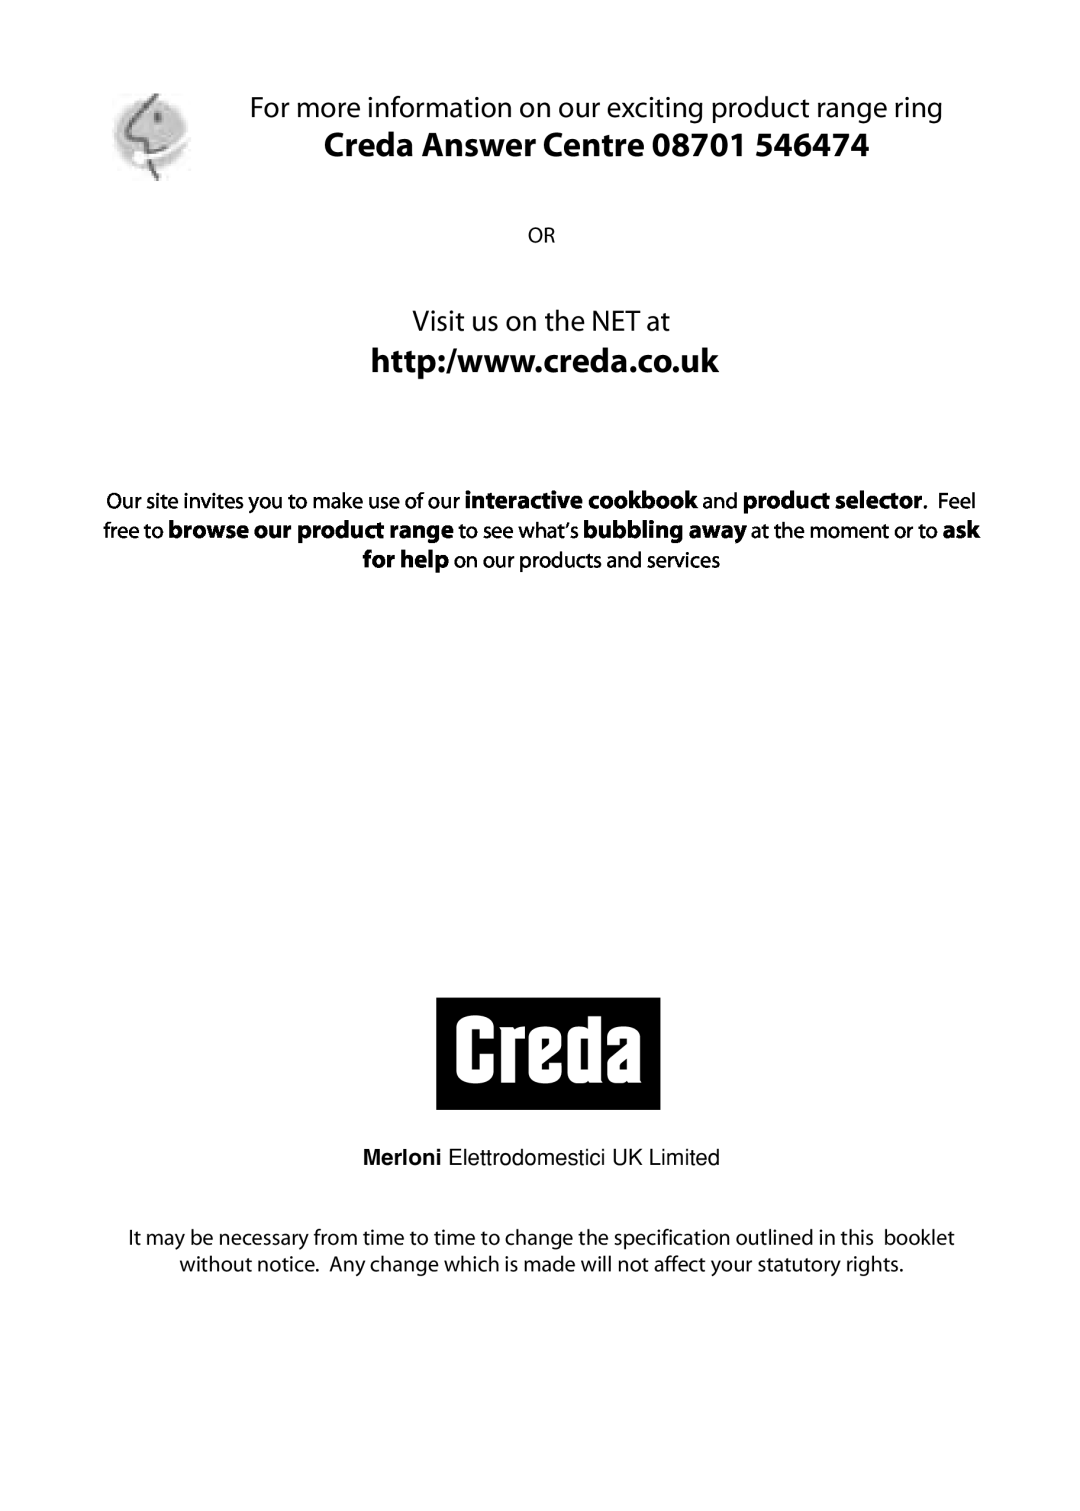 Creda C150, X153, L153 installation instructions Creda Answer Centre, Visit us on the NET at 